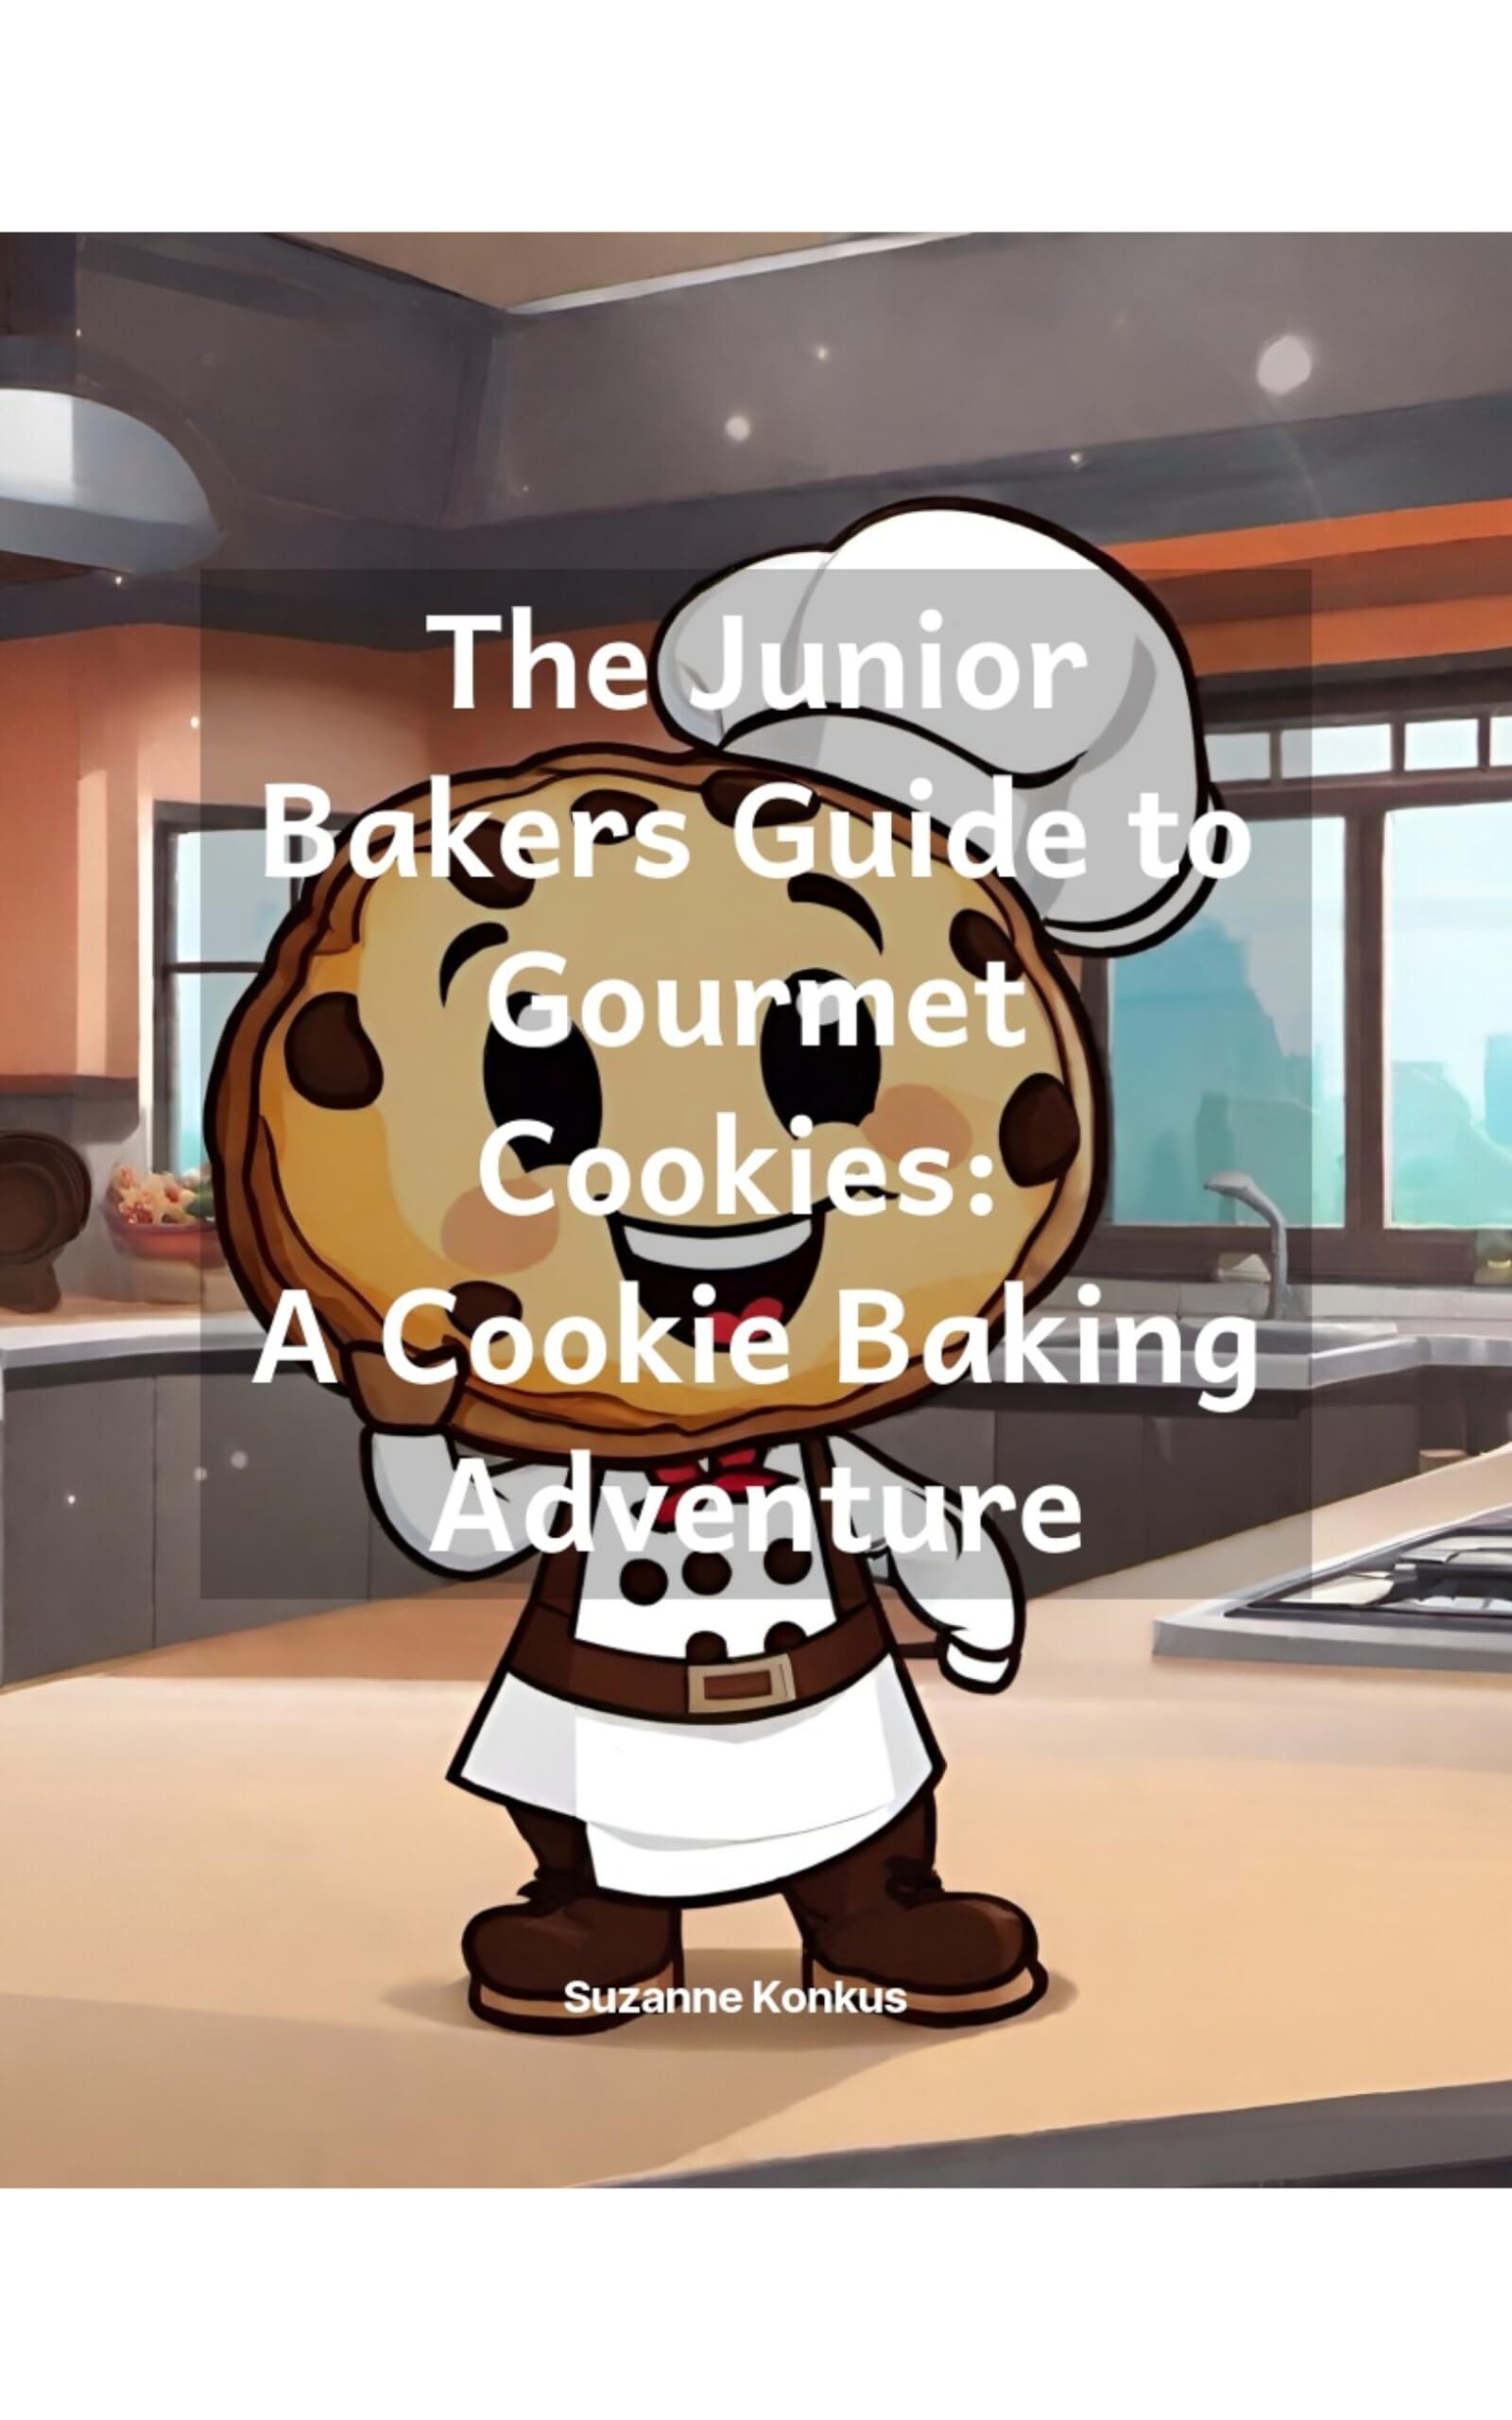 The Junior Bakers Guide to Gourmet Cookies: A Cookie Baking Adventure